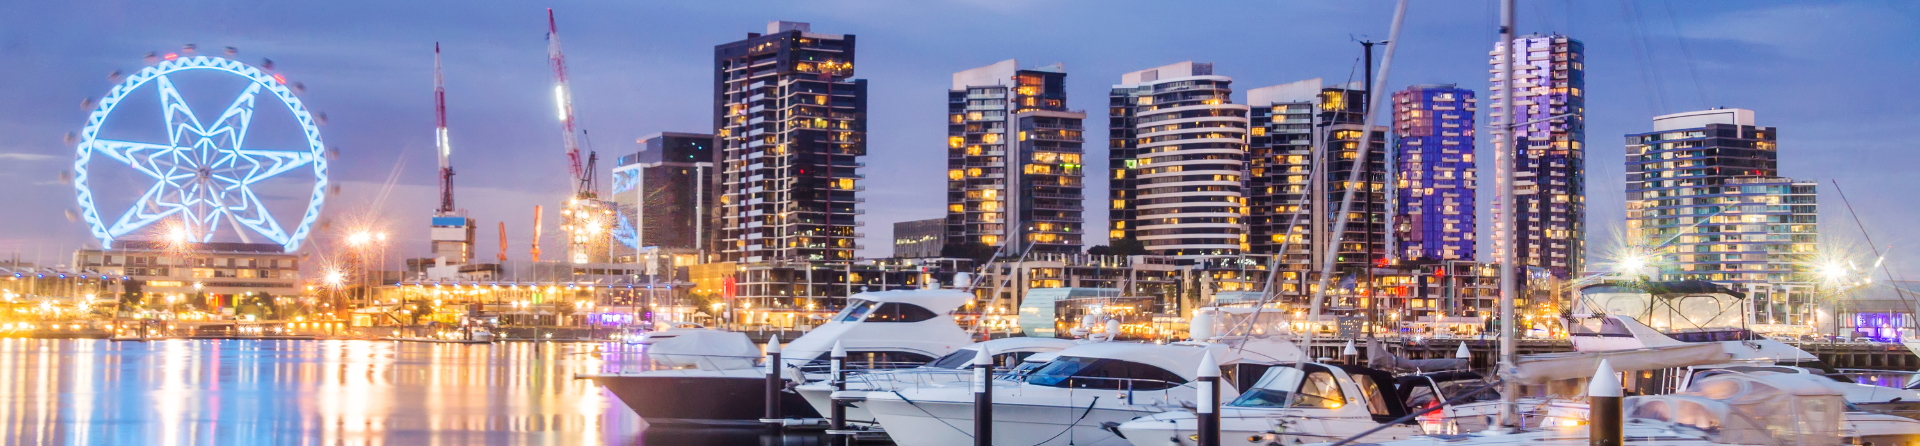 5 things to do in Docklands